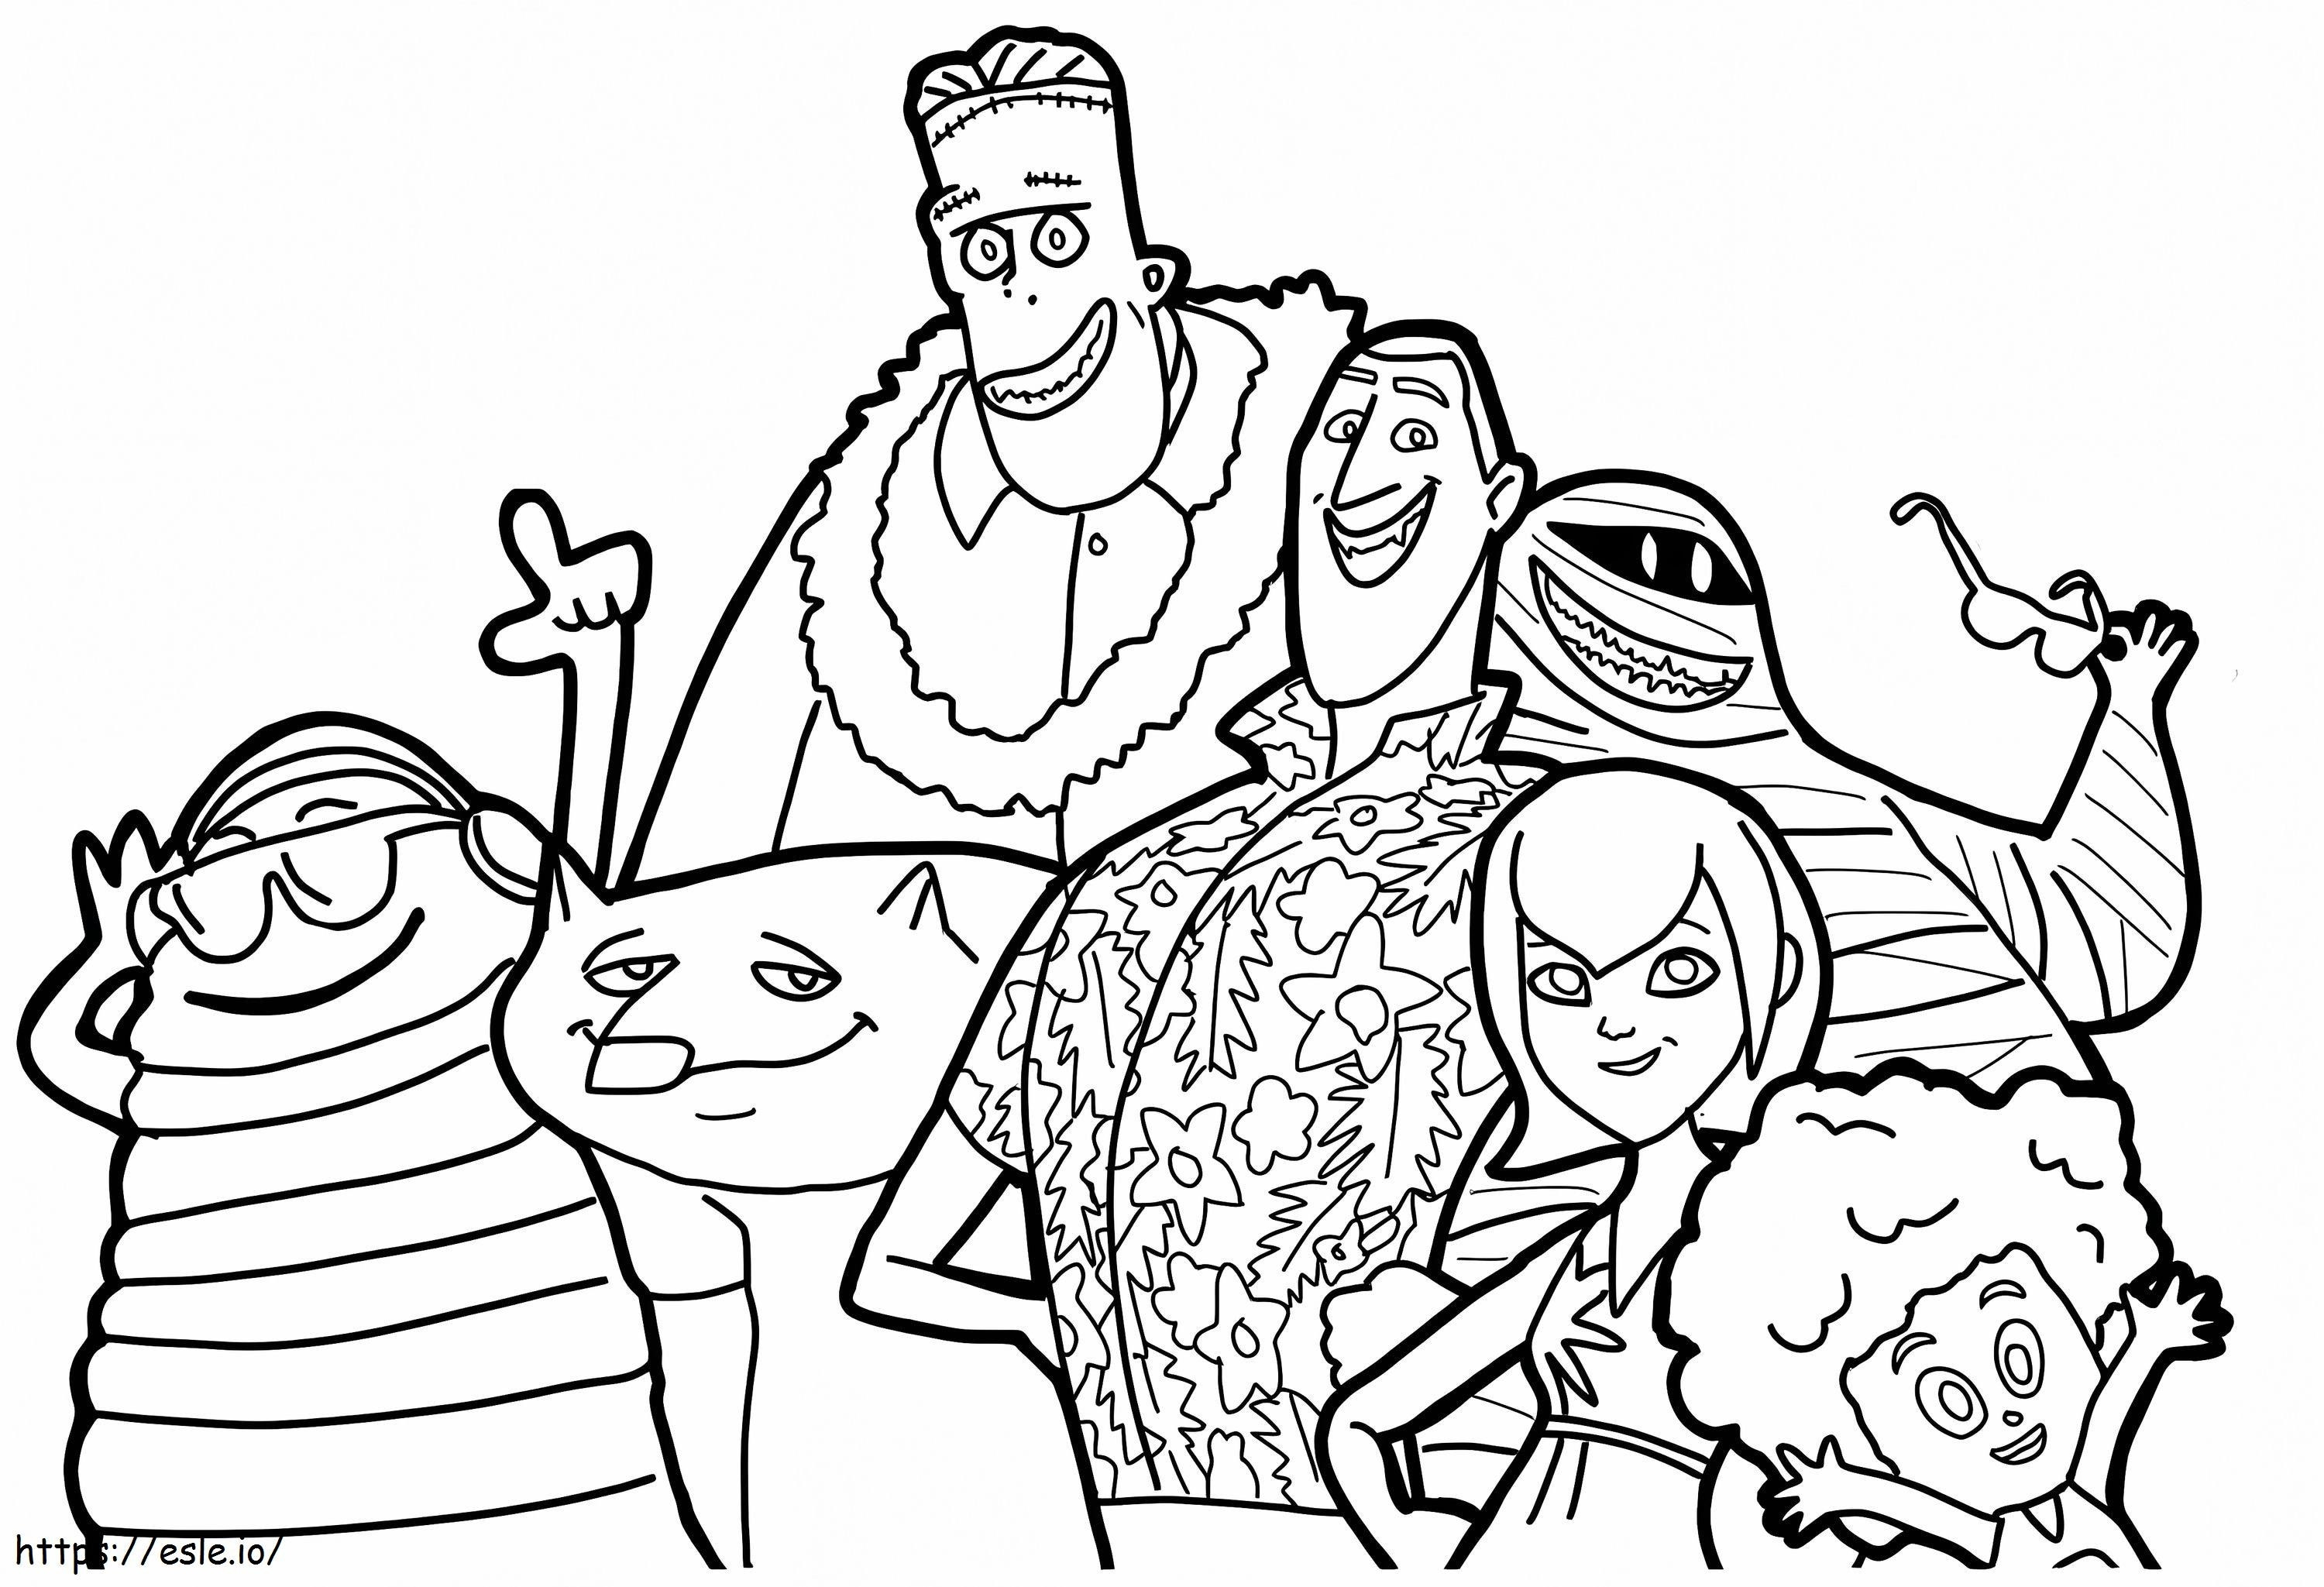 Dracula And His Friends coloring page